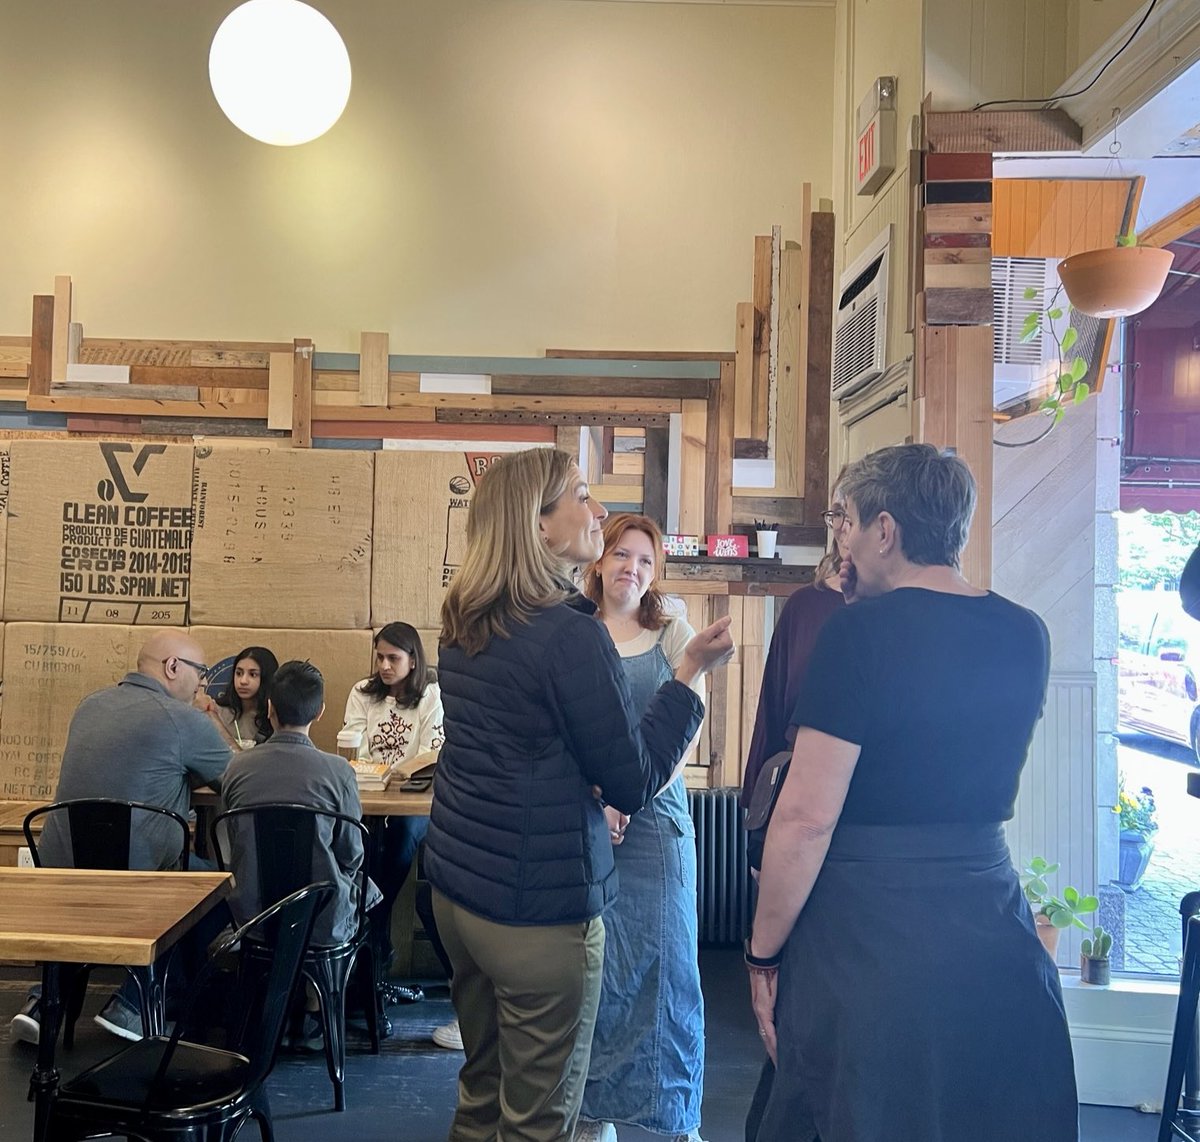 I stopped by @DoYouJavaLove in Montclair this morning for a cup of coffee to fuel my Day of Action! In our community, we stand up for choice, equality, and so our small business owners can have a fair shake.  New Jersey is ready to #StandUpToTrump.